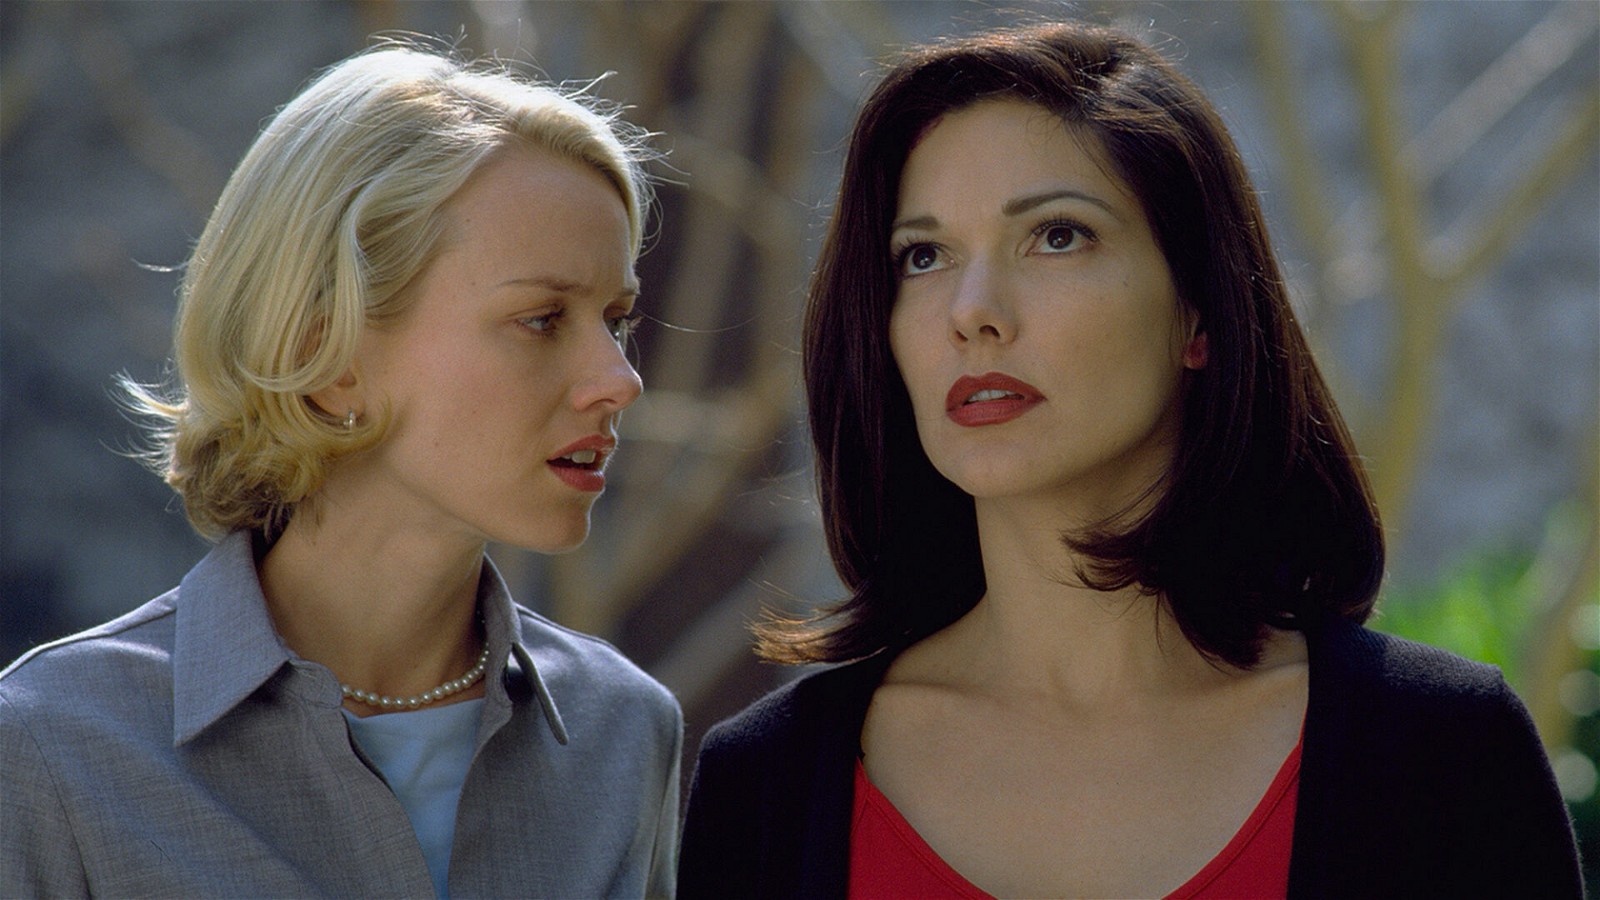 Mulholland Drive is one of David Lynch's most celebrated films